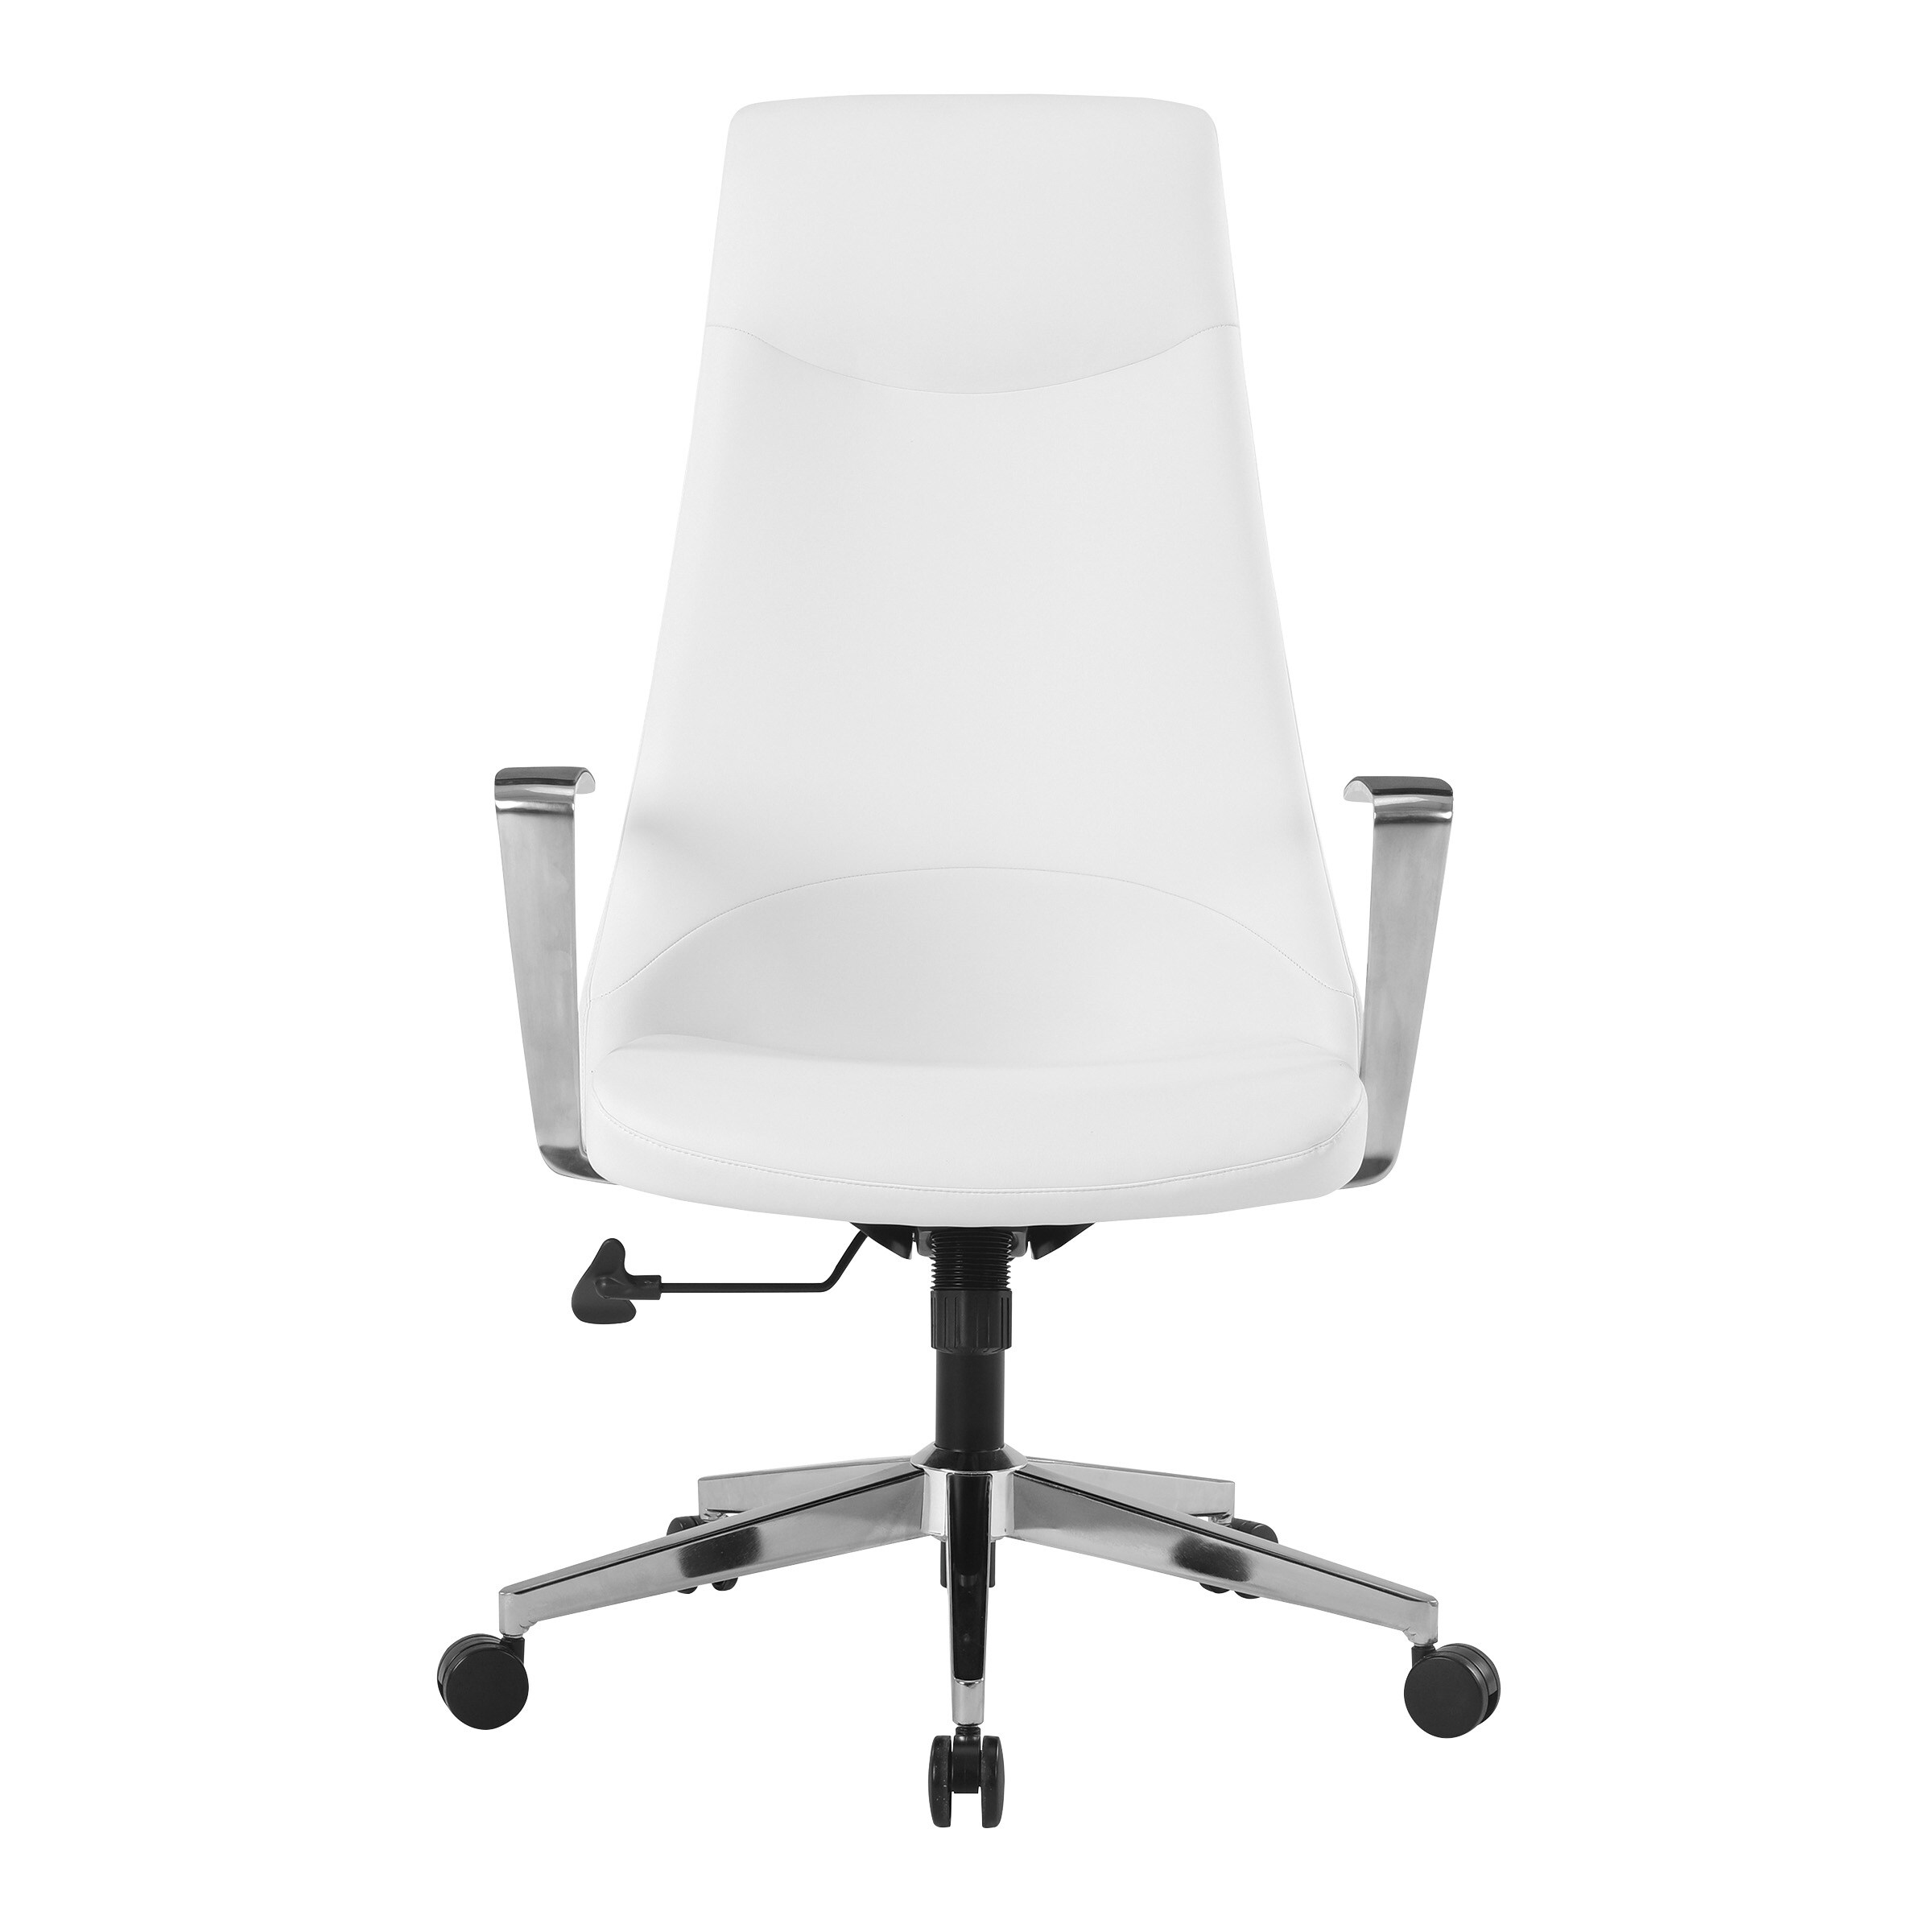 https://ak1.ostkcdn.com/images/products/is/images/direct/e4e6ccaaf92460e49dc34305599d09ad61df02a1/High-Back-Office-Chair-with-Antimicrobial-Fabric.jpg